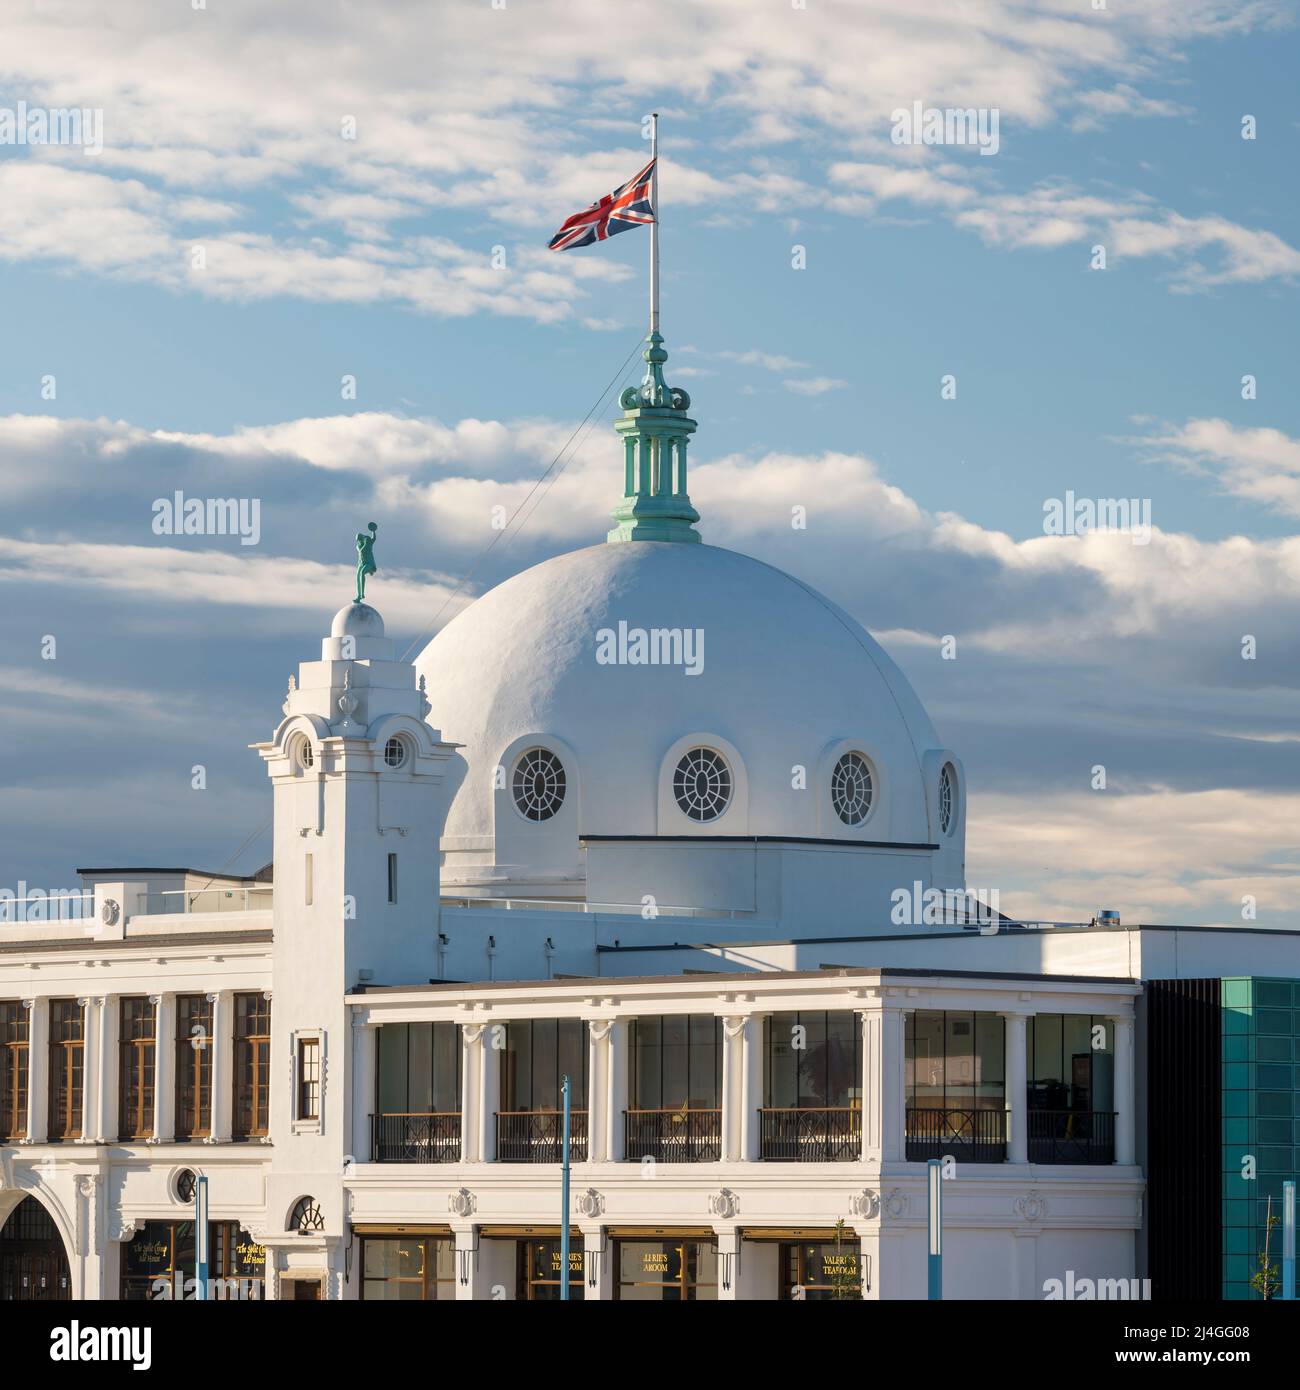 The dome of the Spanish City, now a leisure centre offering food and shopping, Whitley Bay, Tyne and Wear, England Stock Photo